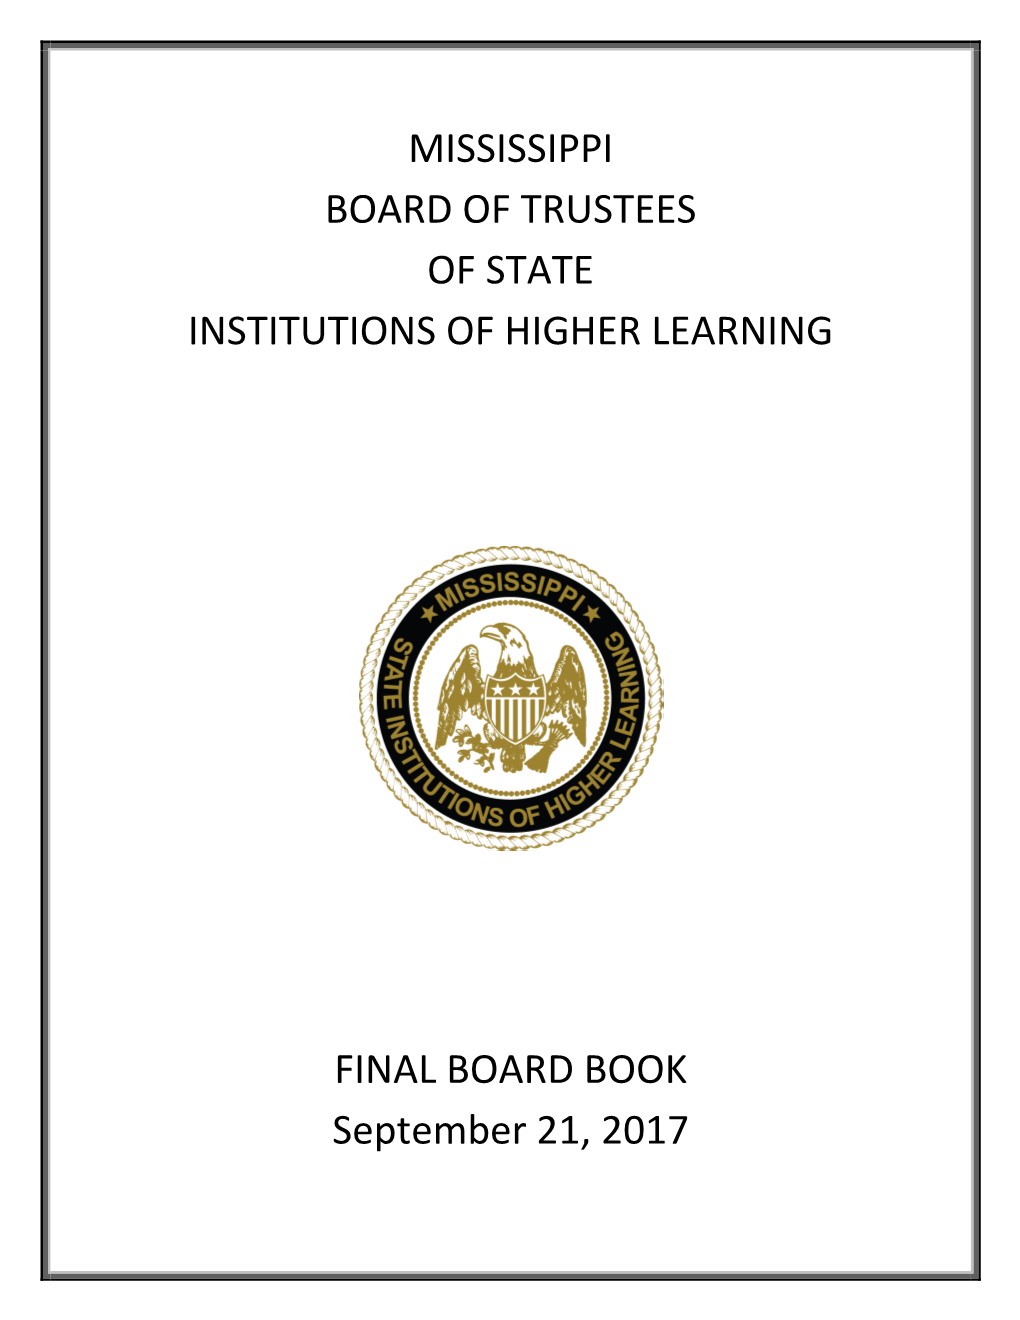 MISSISSIPPI BOARD of TRUSTEES of STATE INSTITUTIONS of HIGHER LEARNING FINAL BOARD BOOK September 21, 2017